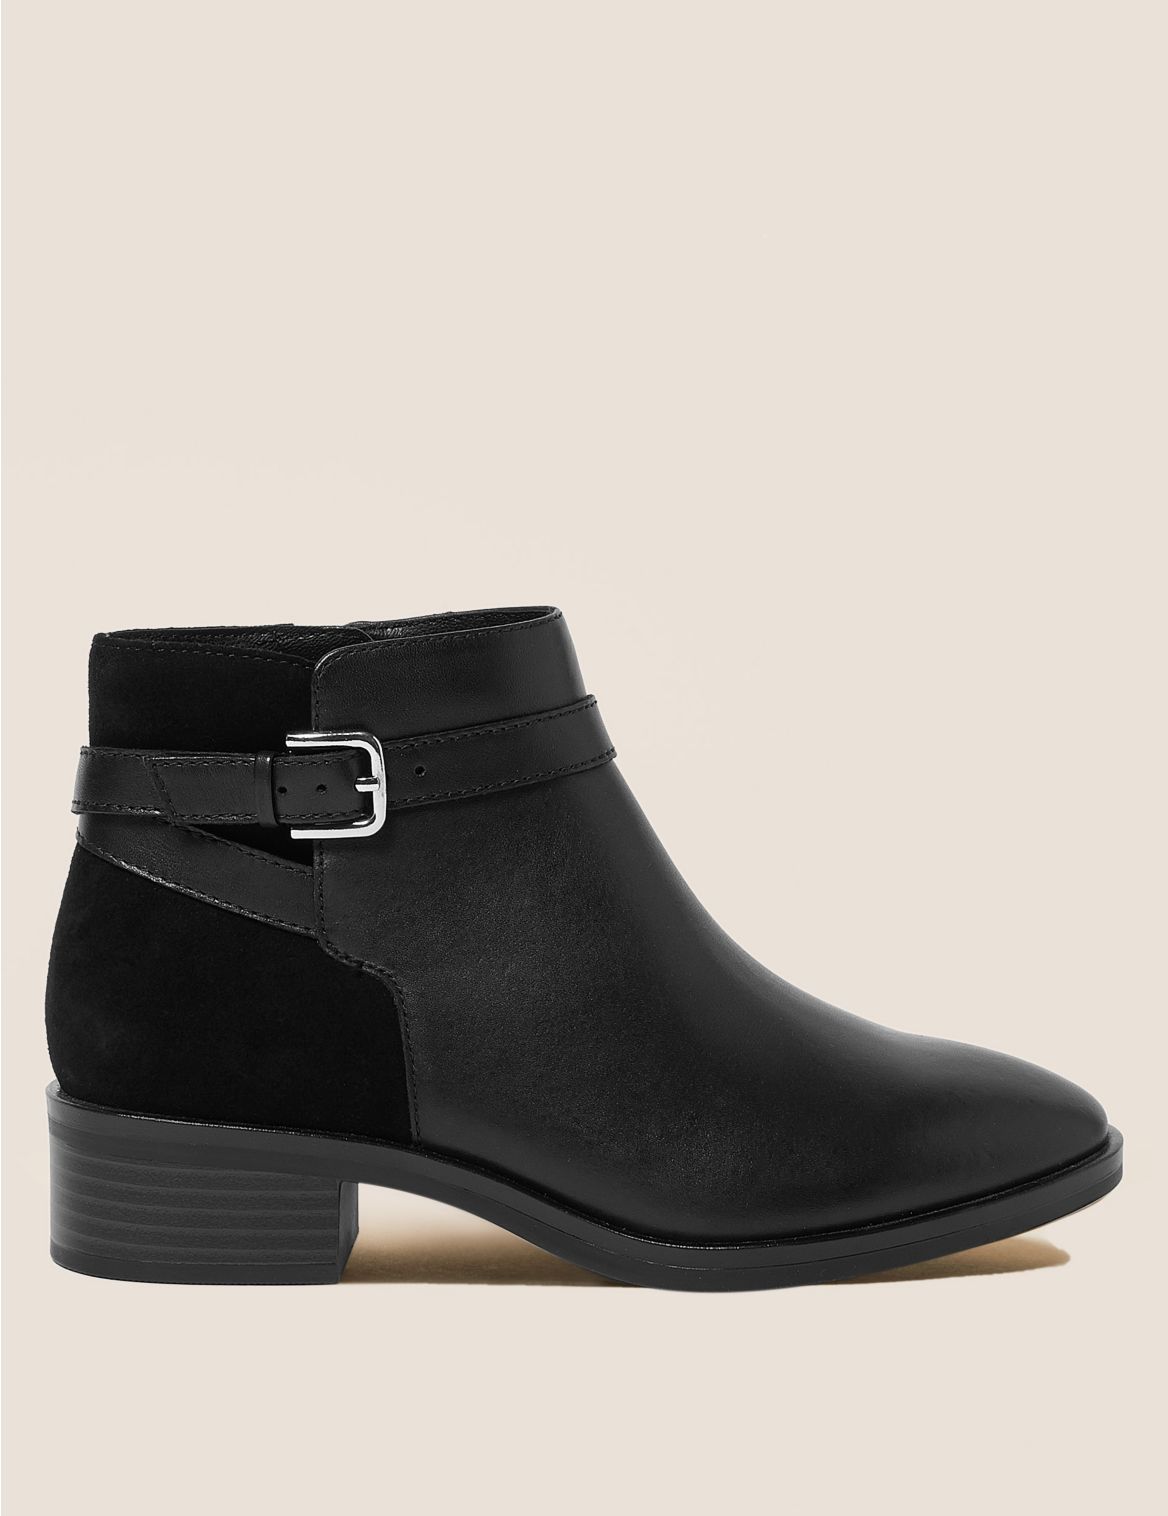 Wide Fit Leather Block Heel Ankle Boots Black